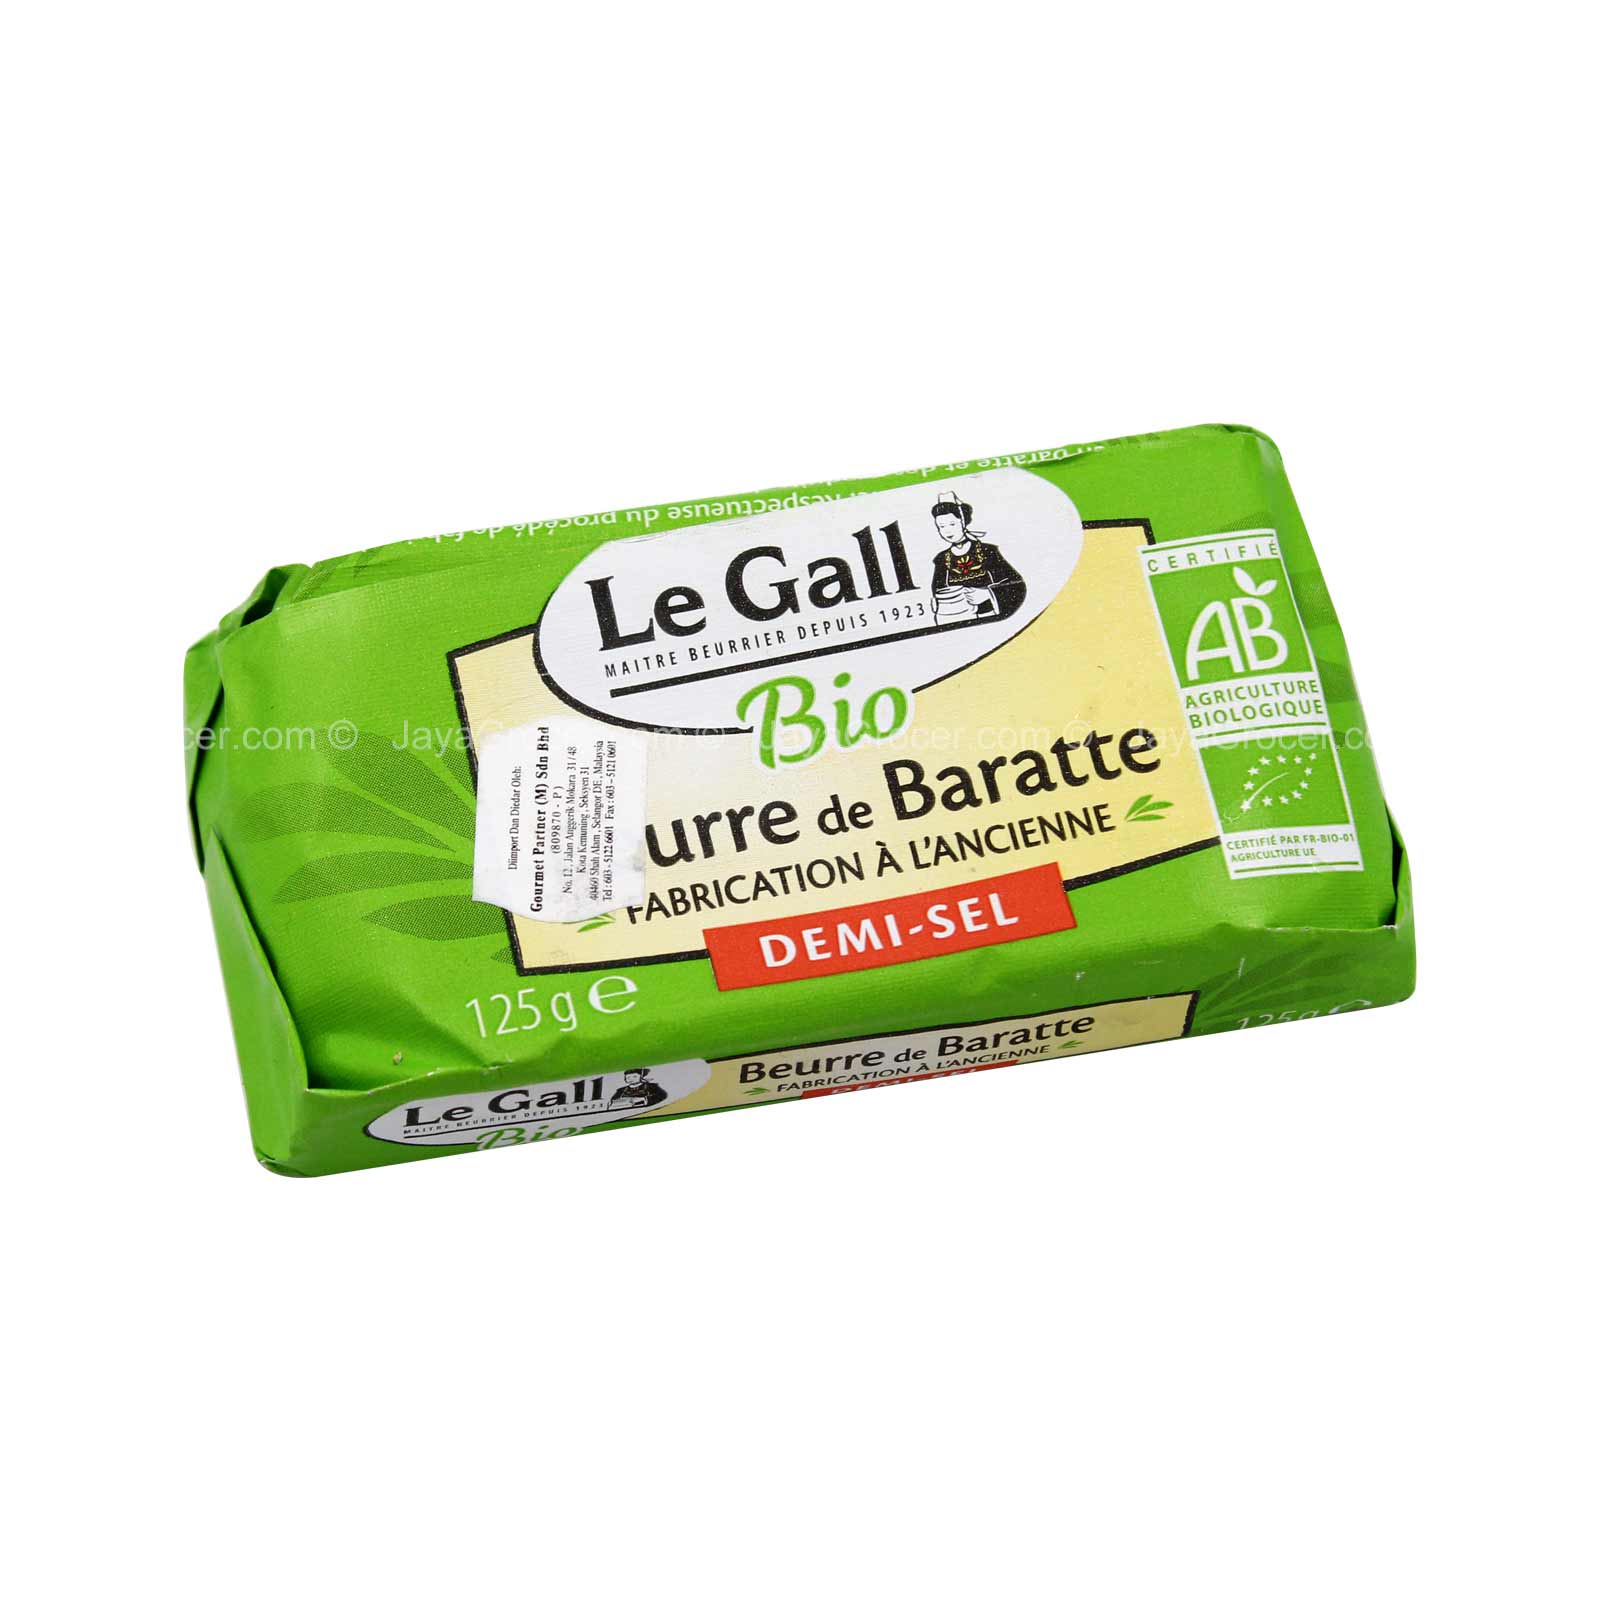 Beurre demi-sel - 250g - Le Gall